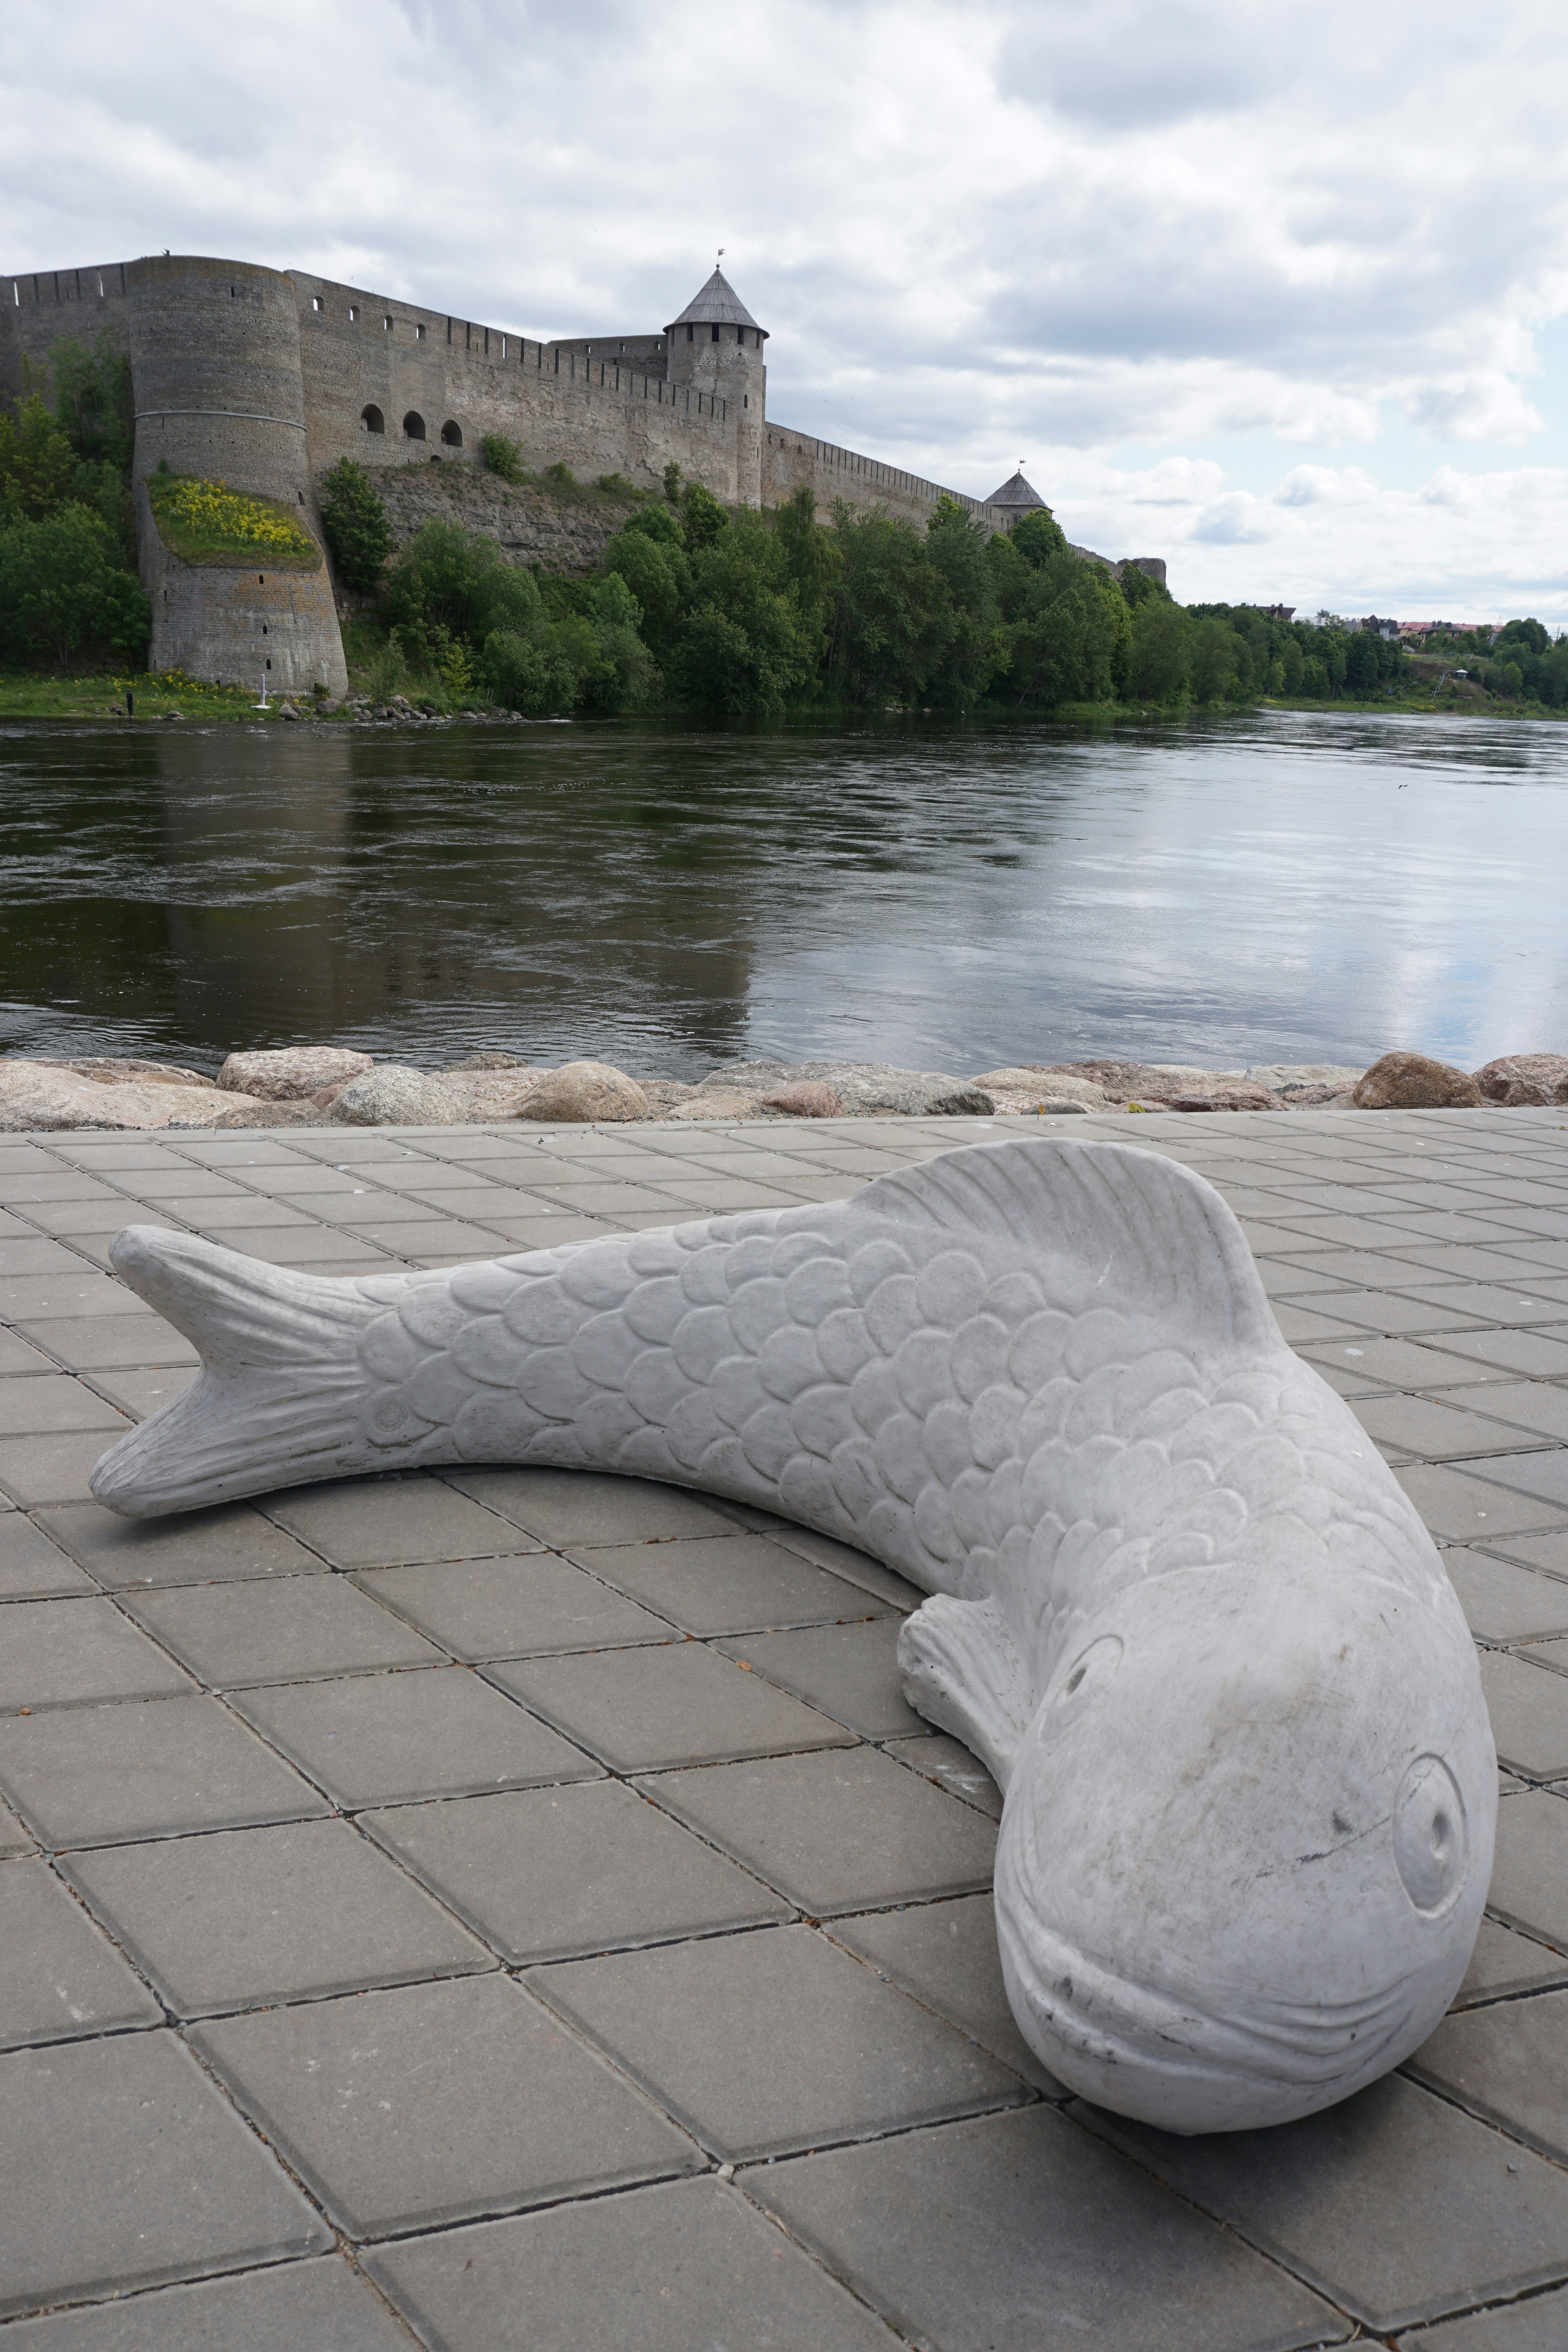 A fish statue at the Narva river. The river marks the border between Estonia and Russia. On the other side of the river is the Russian Ivangorod Castle